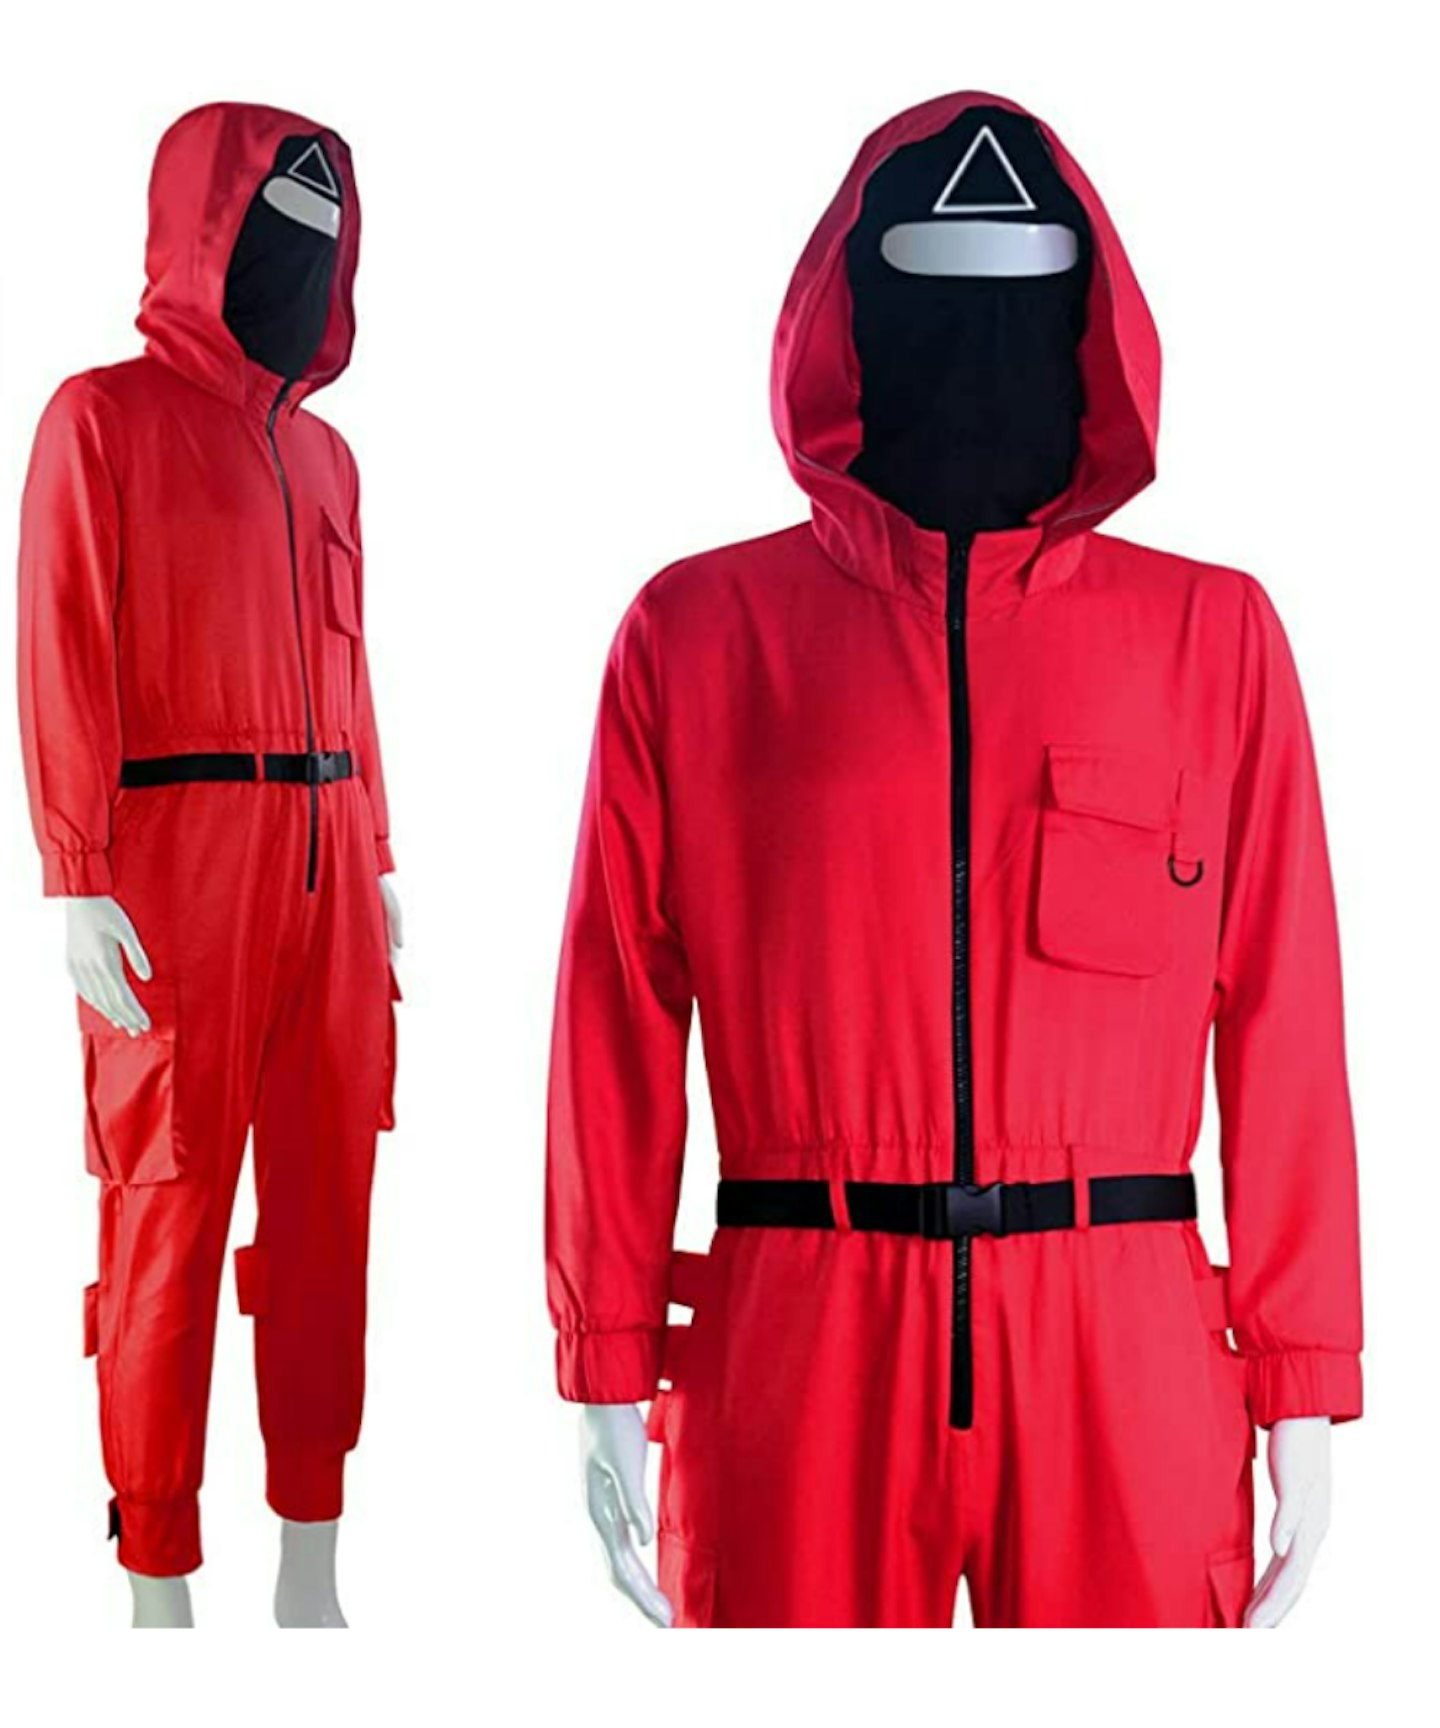 WUOOYOQ Squid Game Cosplay Jumpsuit